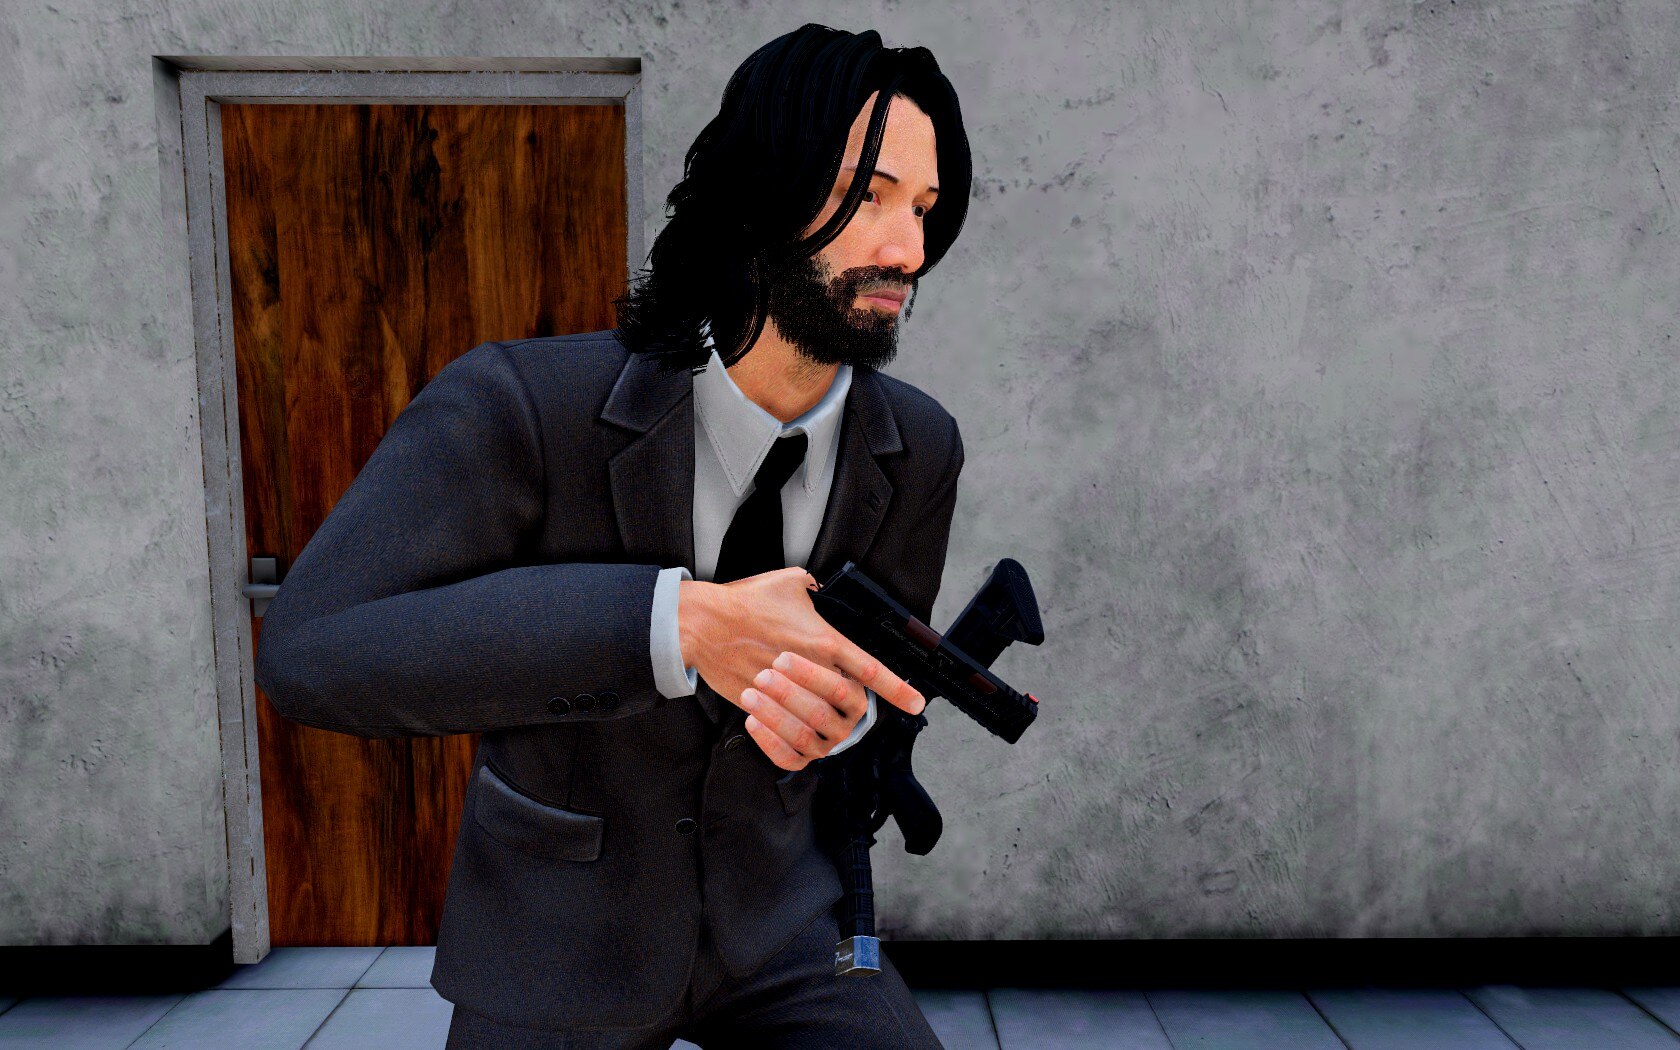 This 'Half-Life: Alyx' Mod is the John Wick VR Game We Always